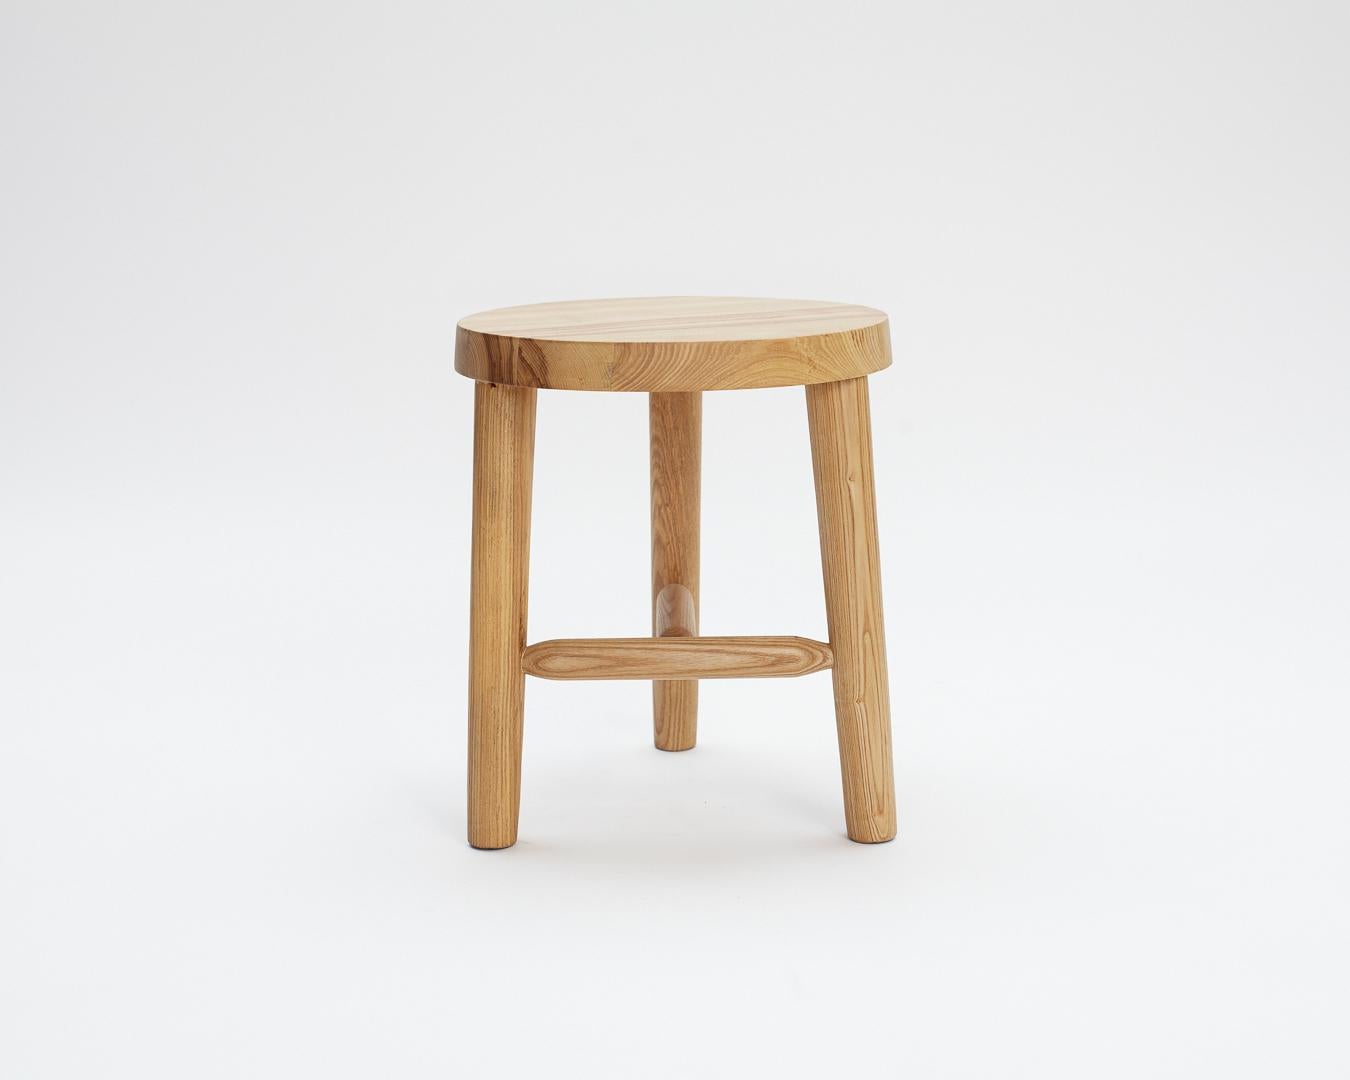 Inspired by a milking stool, our three legged 16” stool sits low to the ground and is made from solid ash. Cross braces add sturdiness and beautiful detailing.